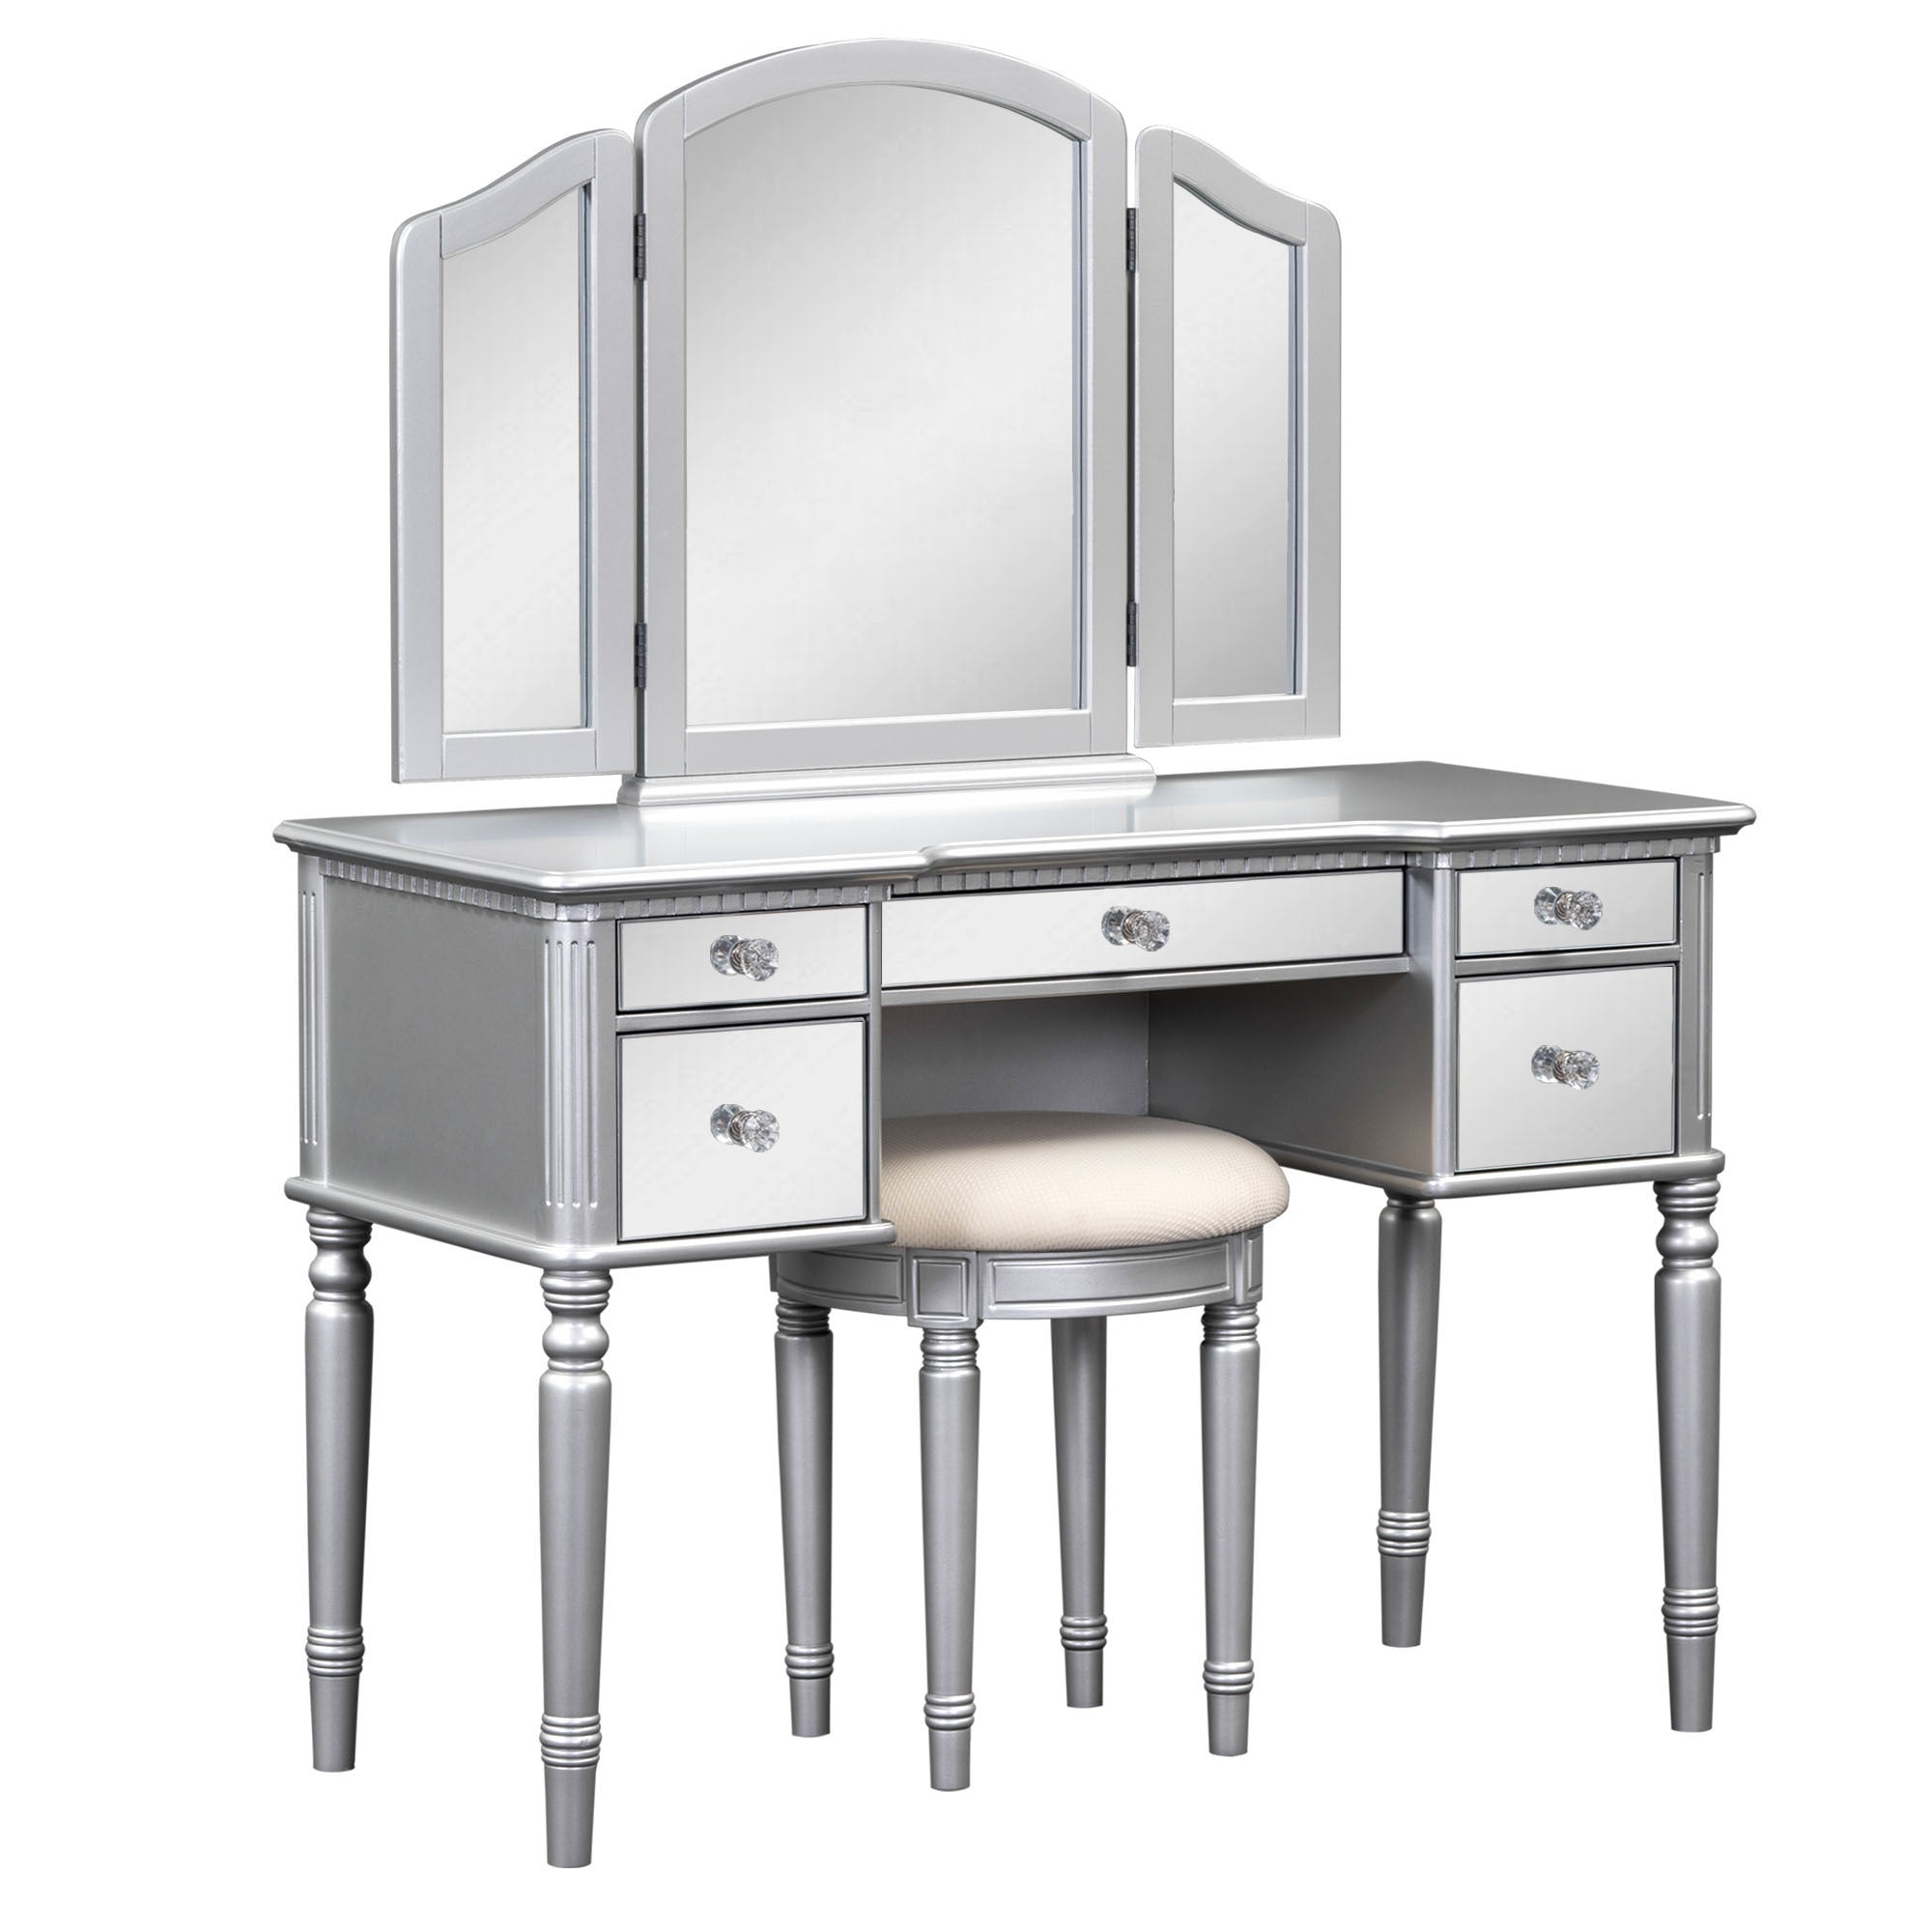 43" Silver Makeup Vanity Dressing Table Set with Mirrored Drawers and Stool